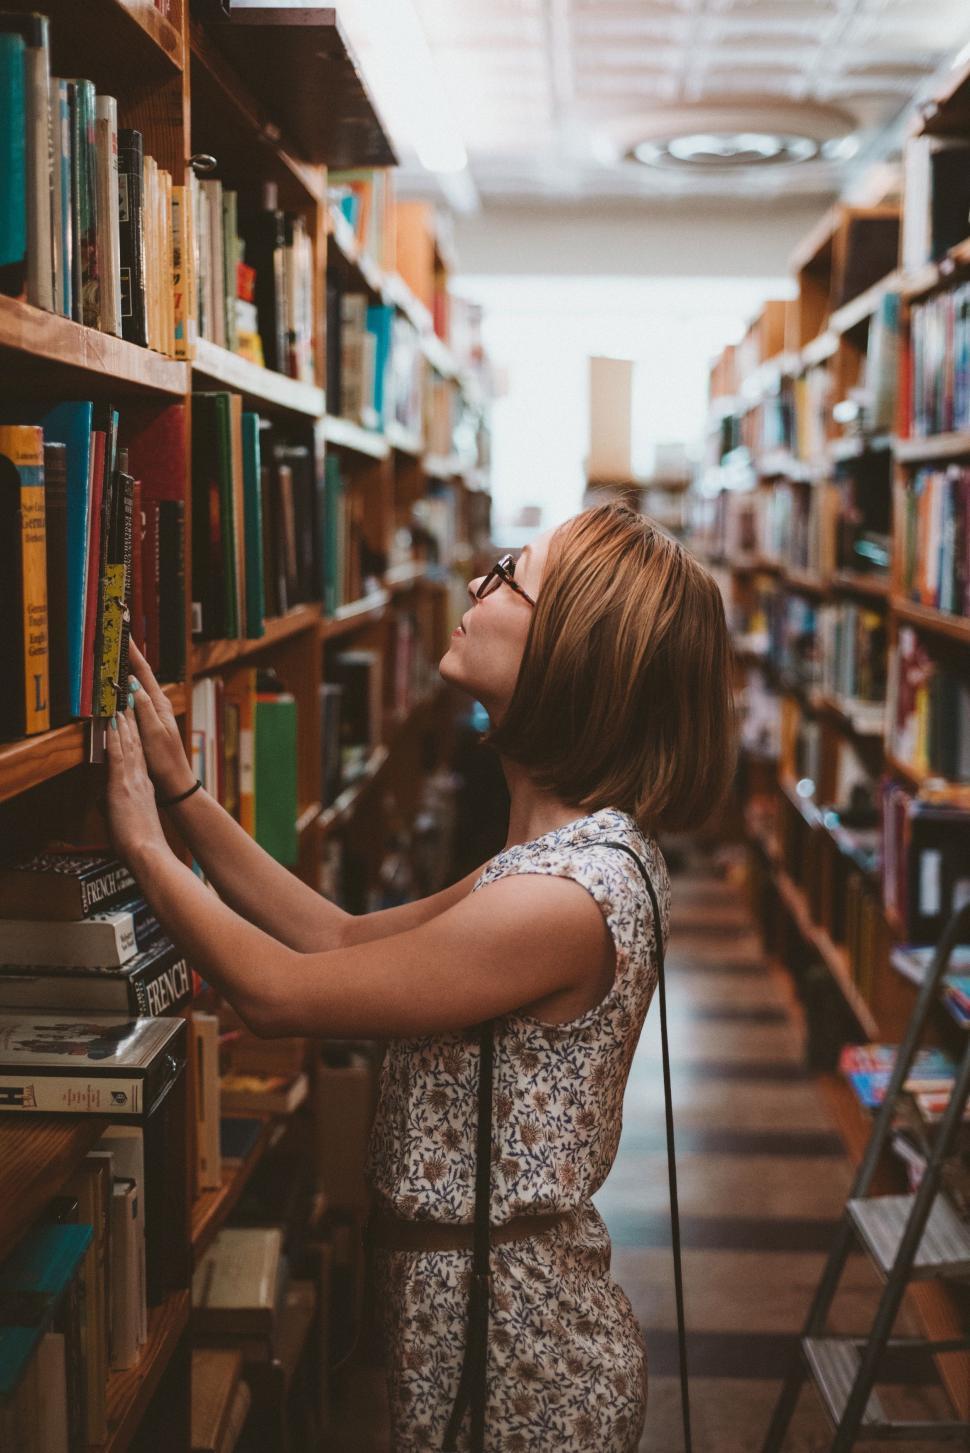 Free Image of Woman Searching for Books in Library 